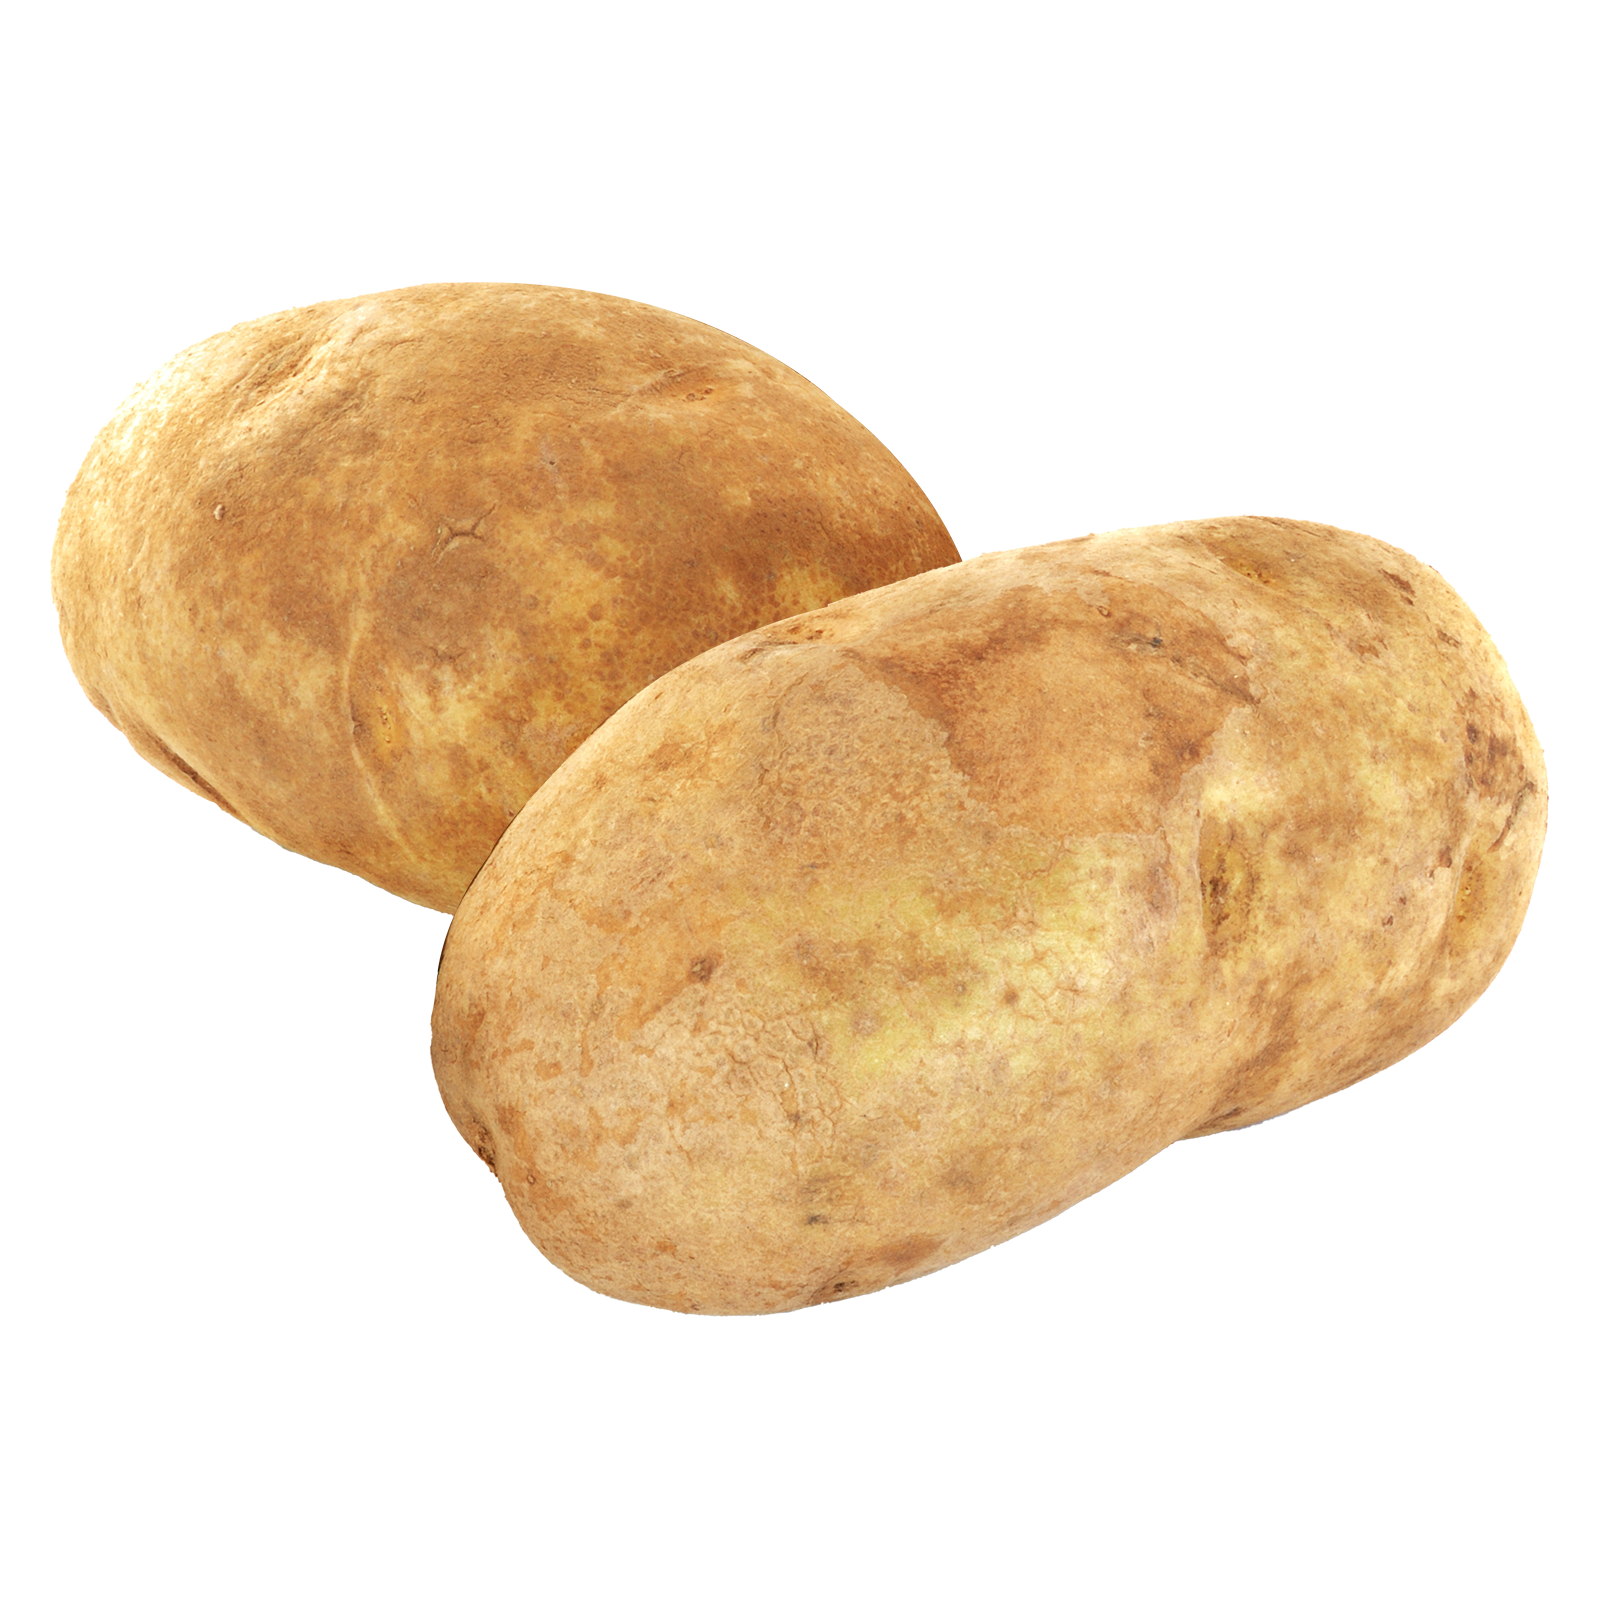 Russet Potato Wrapped Microwaveable 2ct